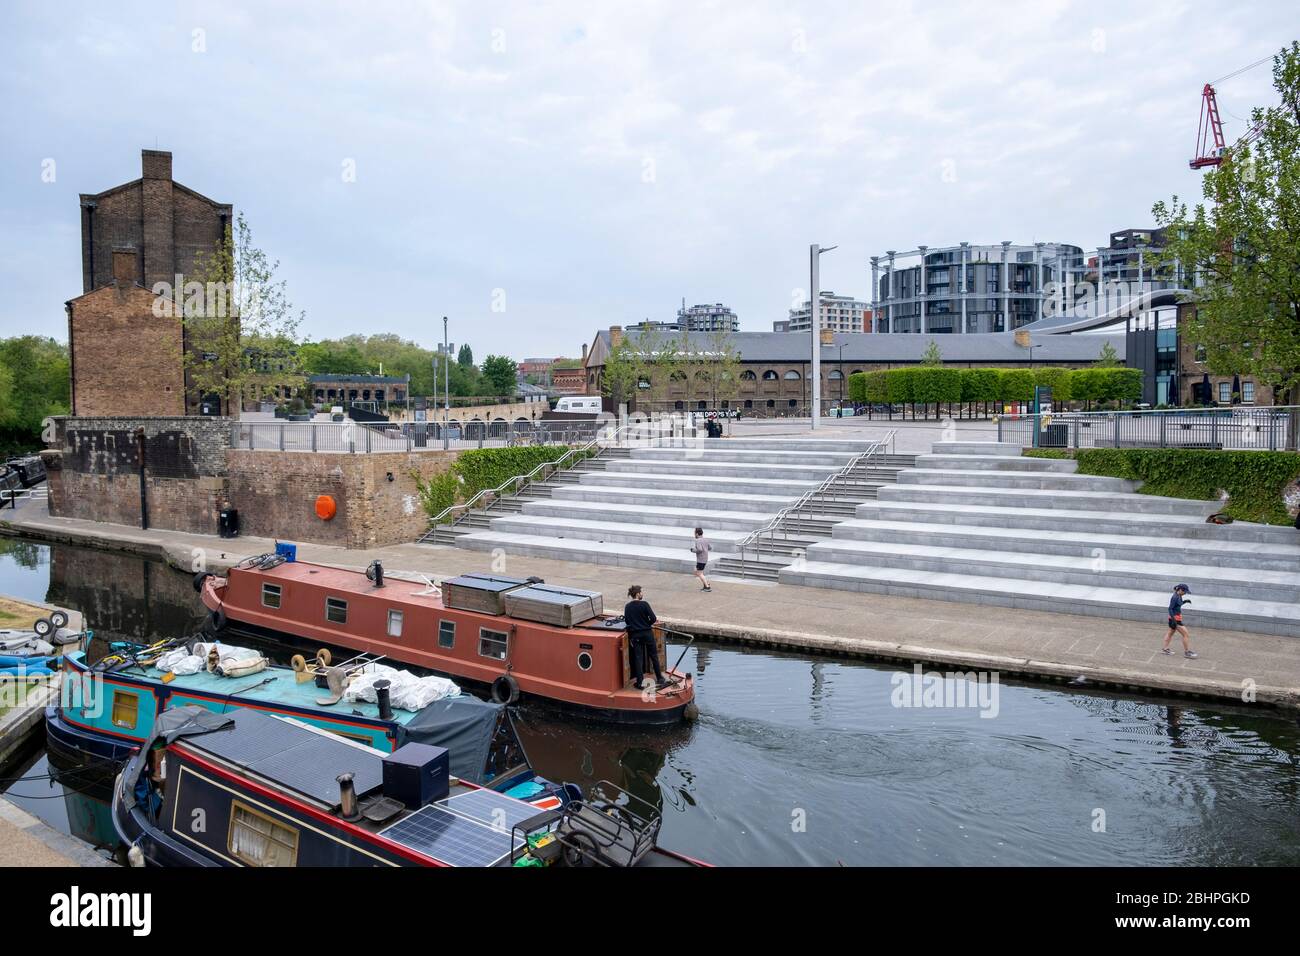 London lockdown: a barge on Regents Canal passes Granary Square, Kings Cross, normally busy but empty due to covid-10 lockdown in the London, UK Stock Photo